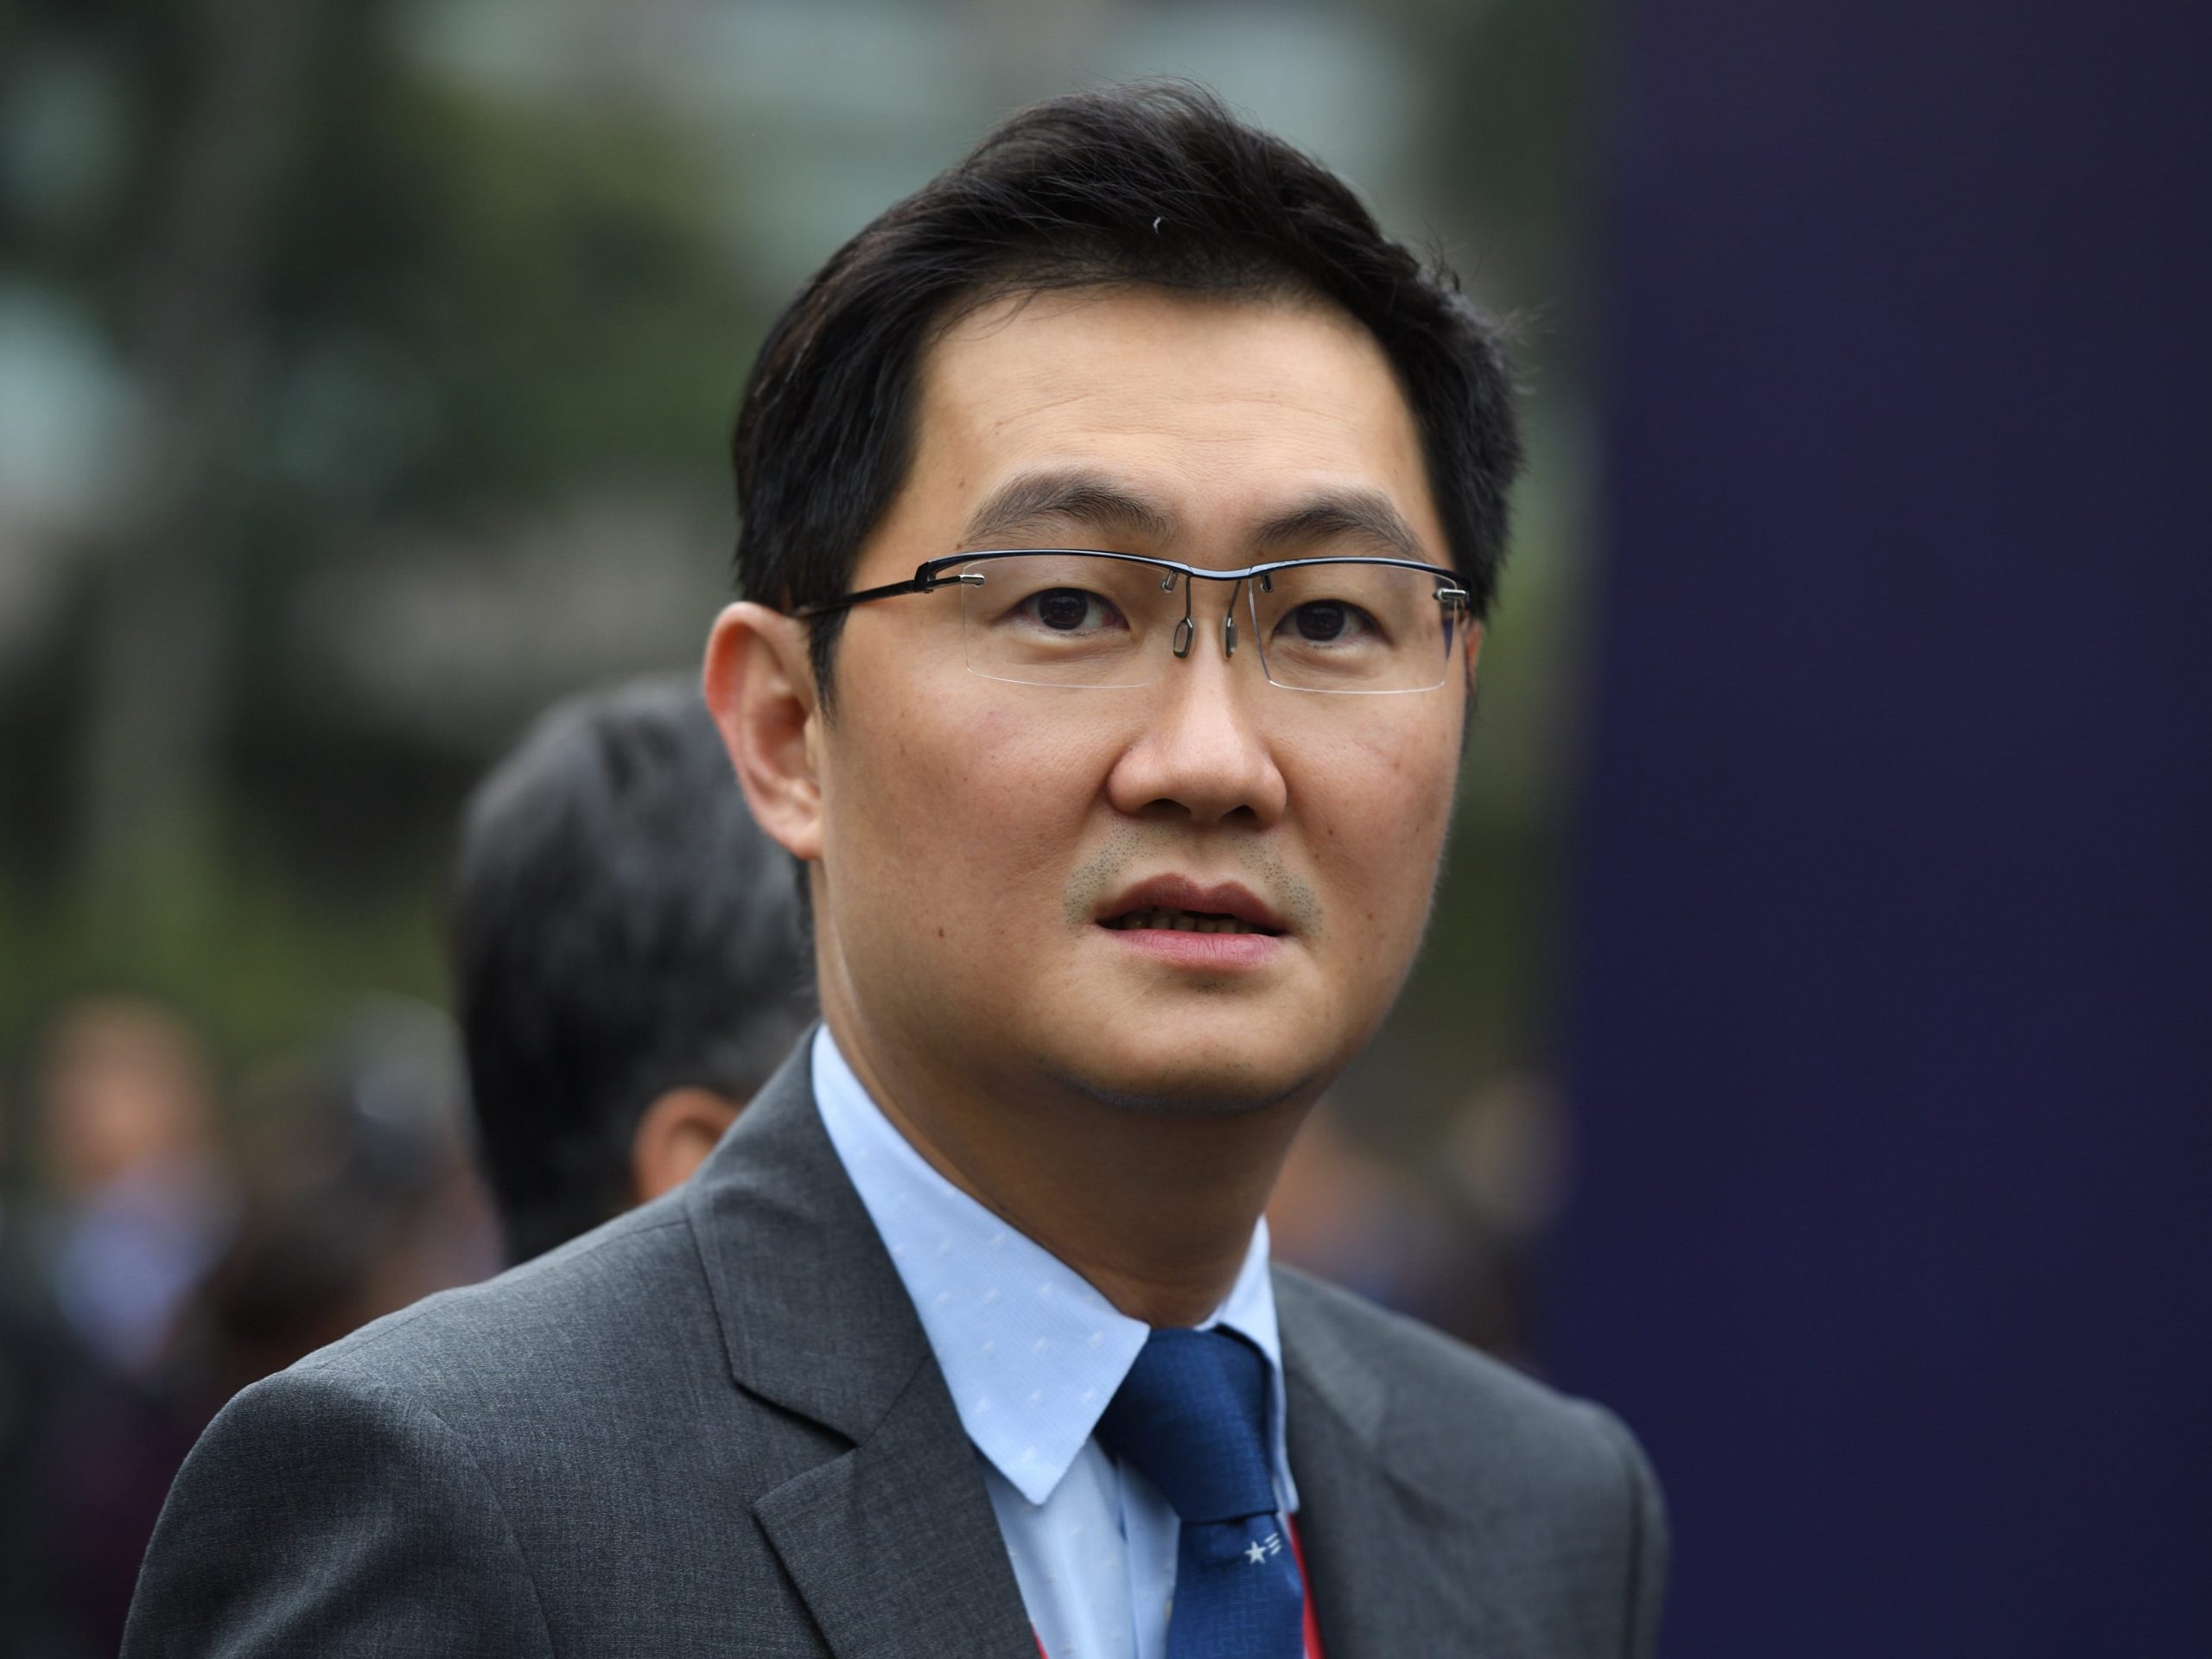 Ma Huateng, chairman and chief executive officer of Tencent Holdings Ltd.